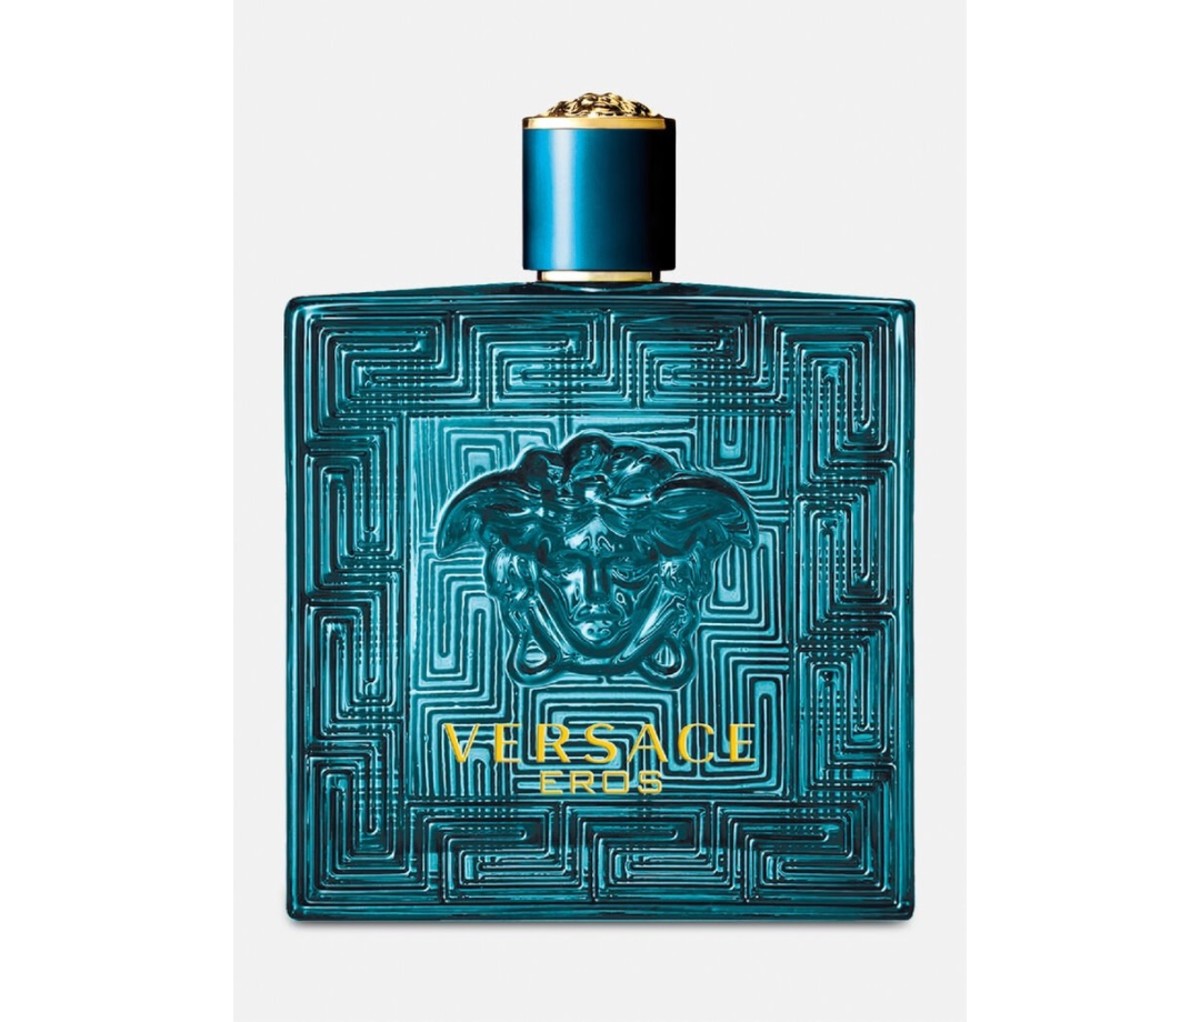 To get you started on the right path for new colognes, we’ve put together this list of absolute must-have fragrances for 2022.